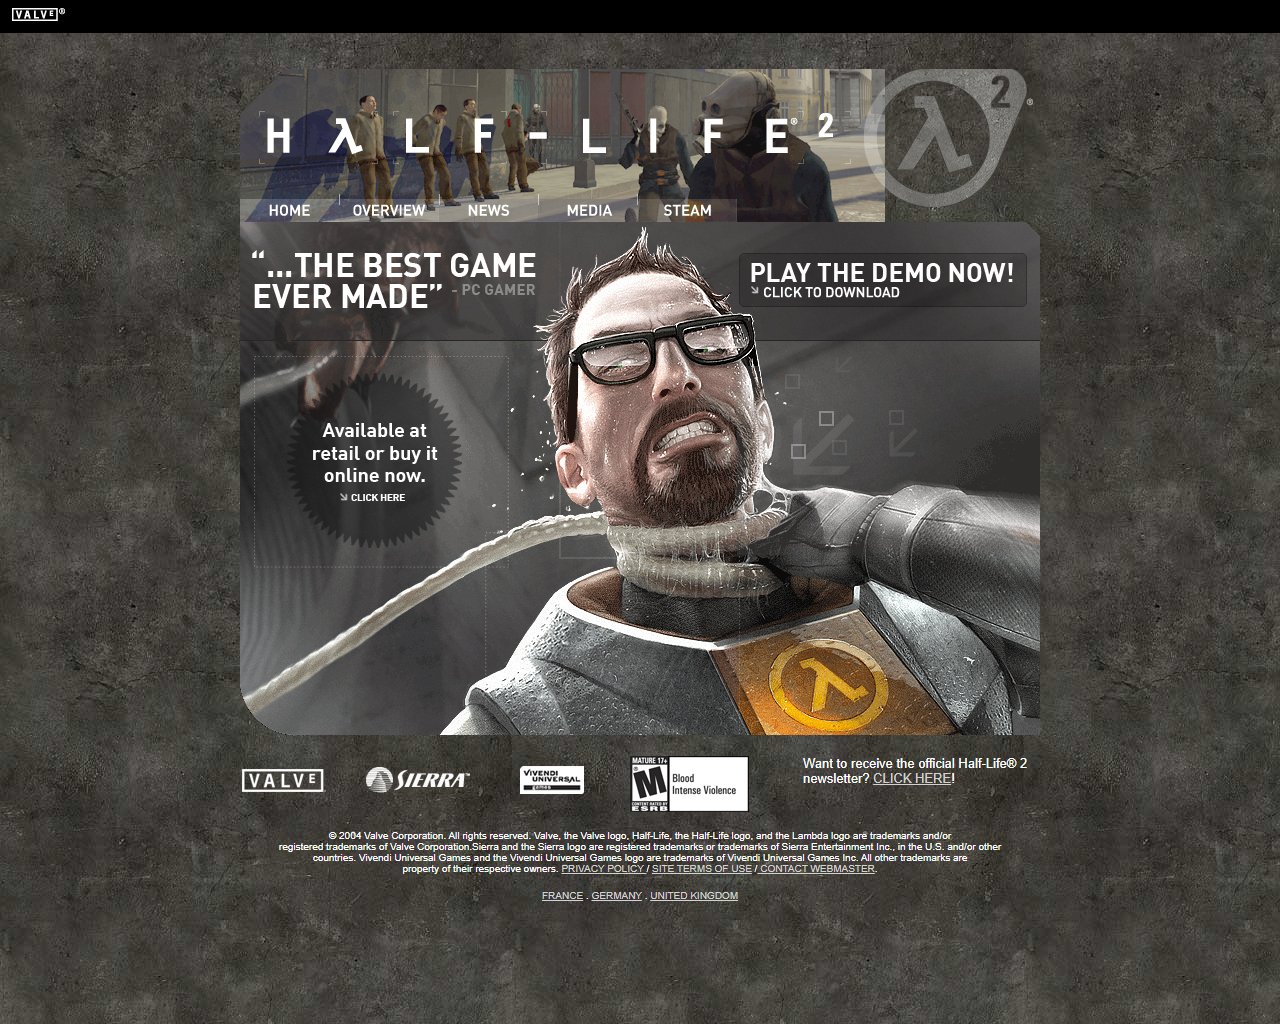 Valve's updated Half-Life 2 website home page, circa 2005. Similar to the previous layout, but now with just a link to buy the game at retail or online and different concept art, as well as a link to download the demo.